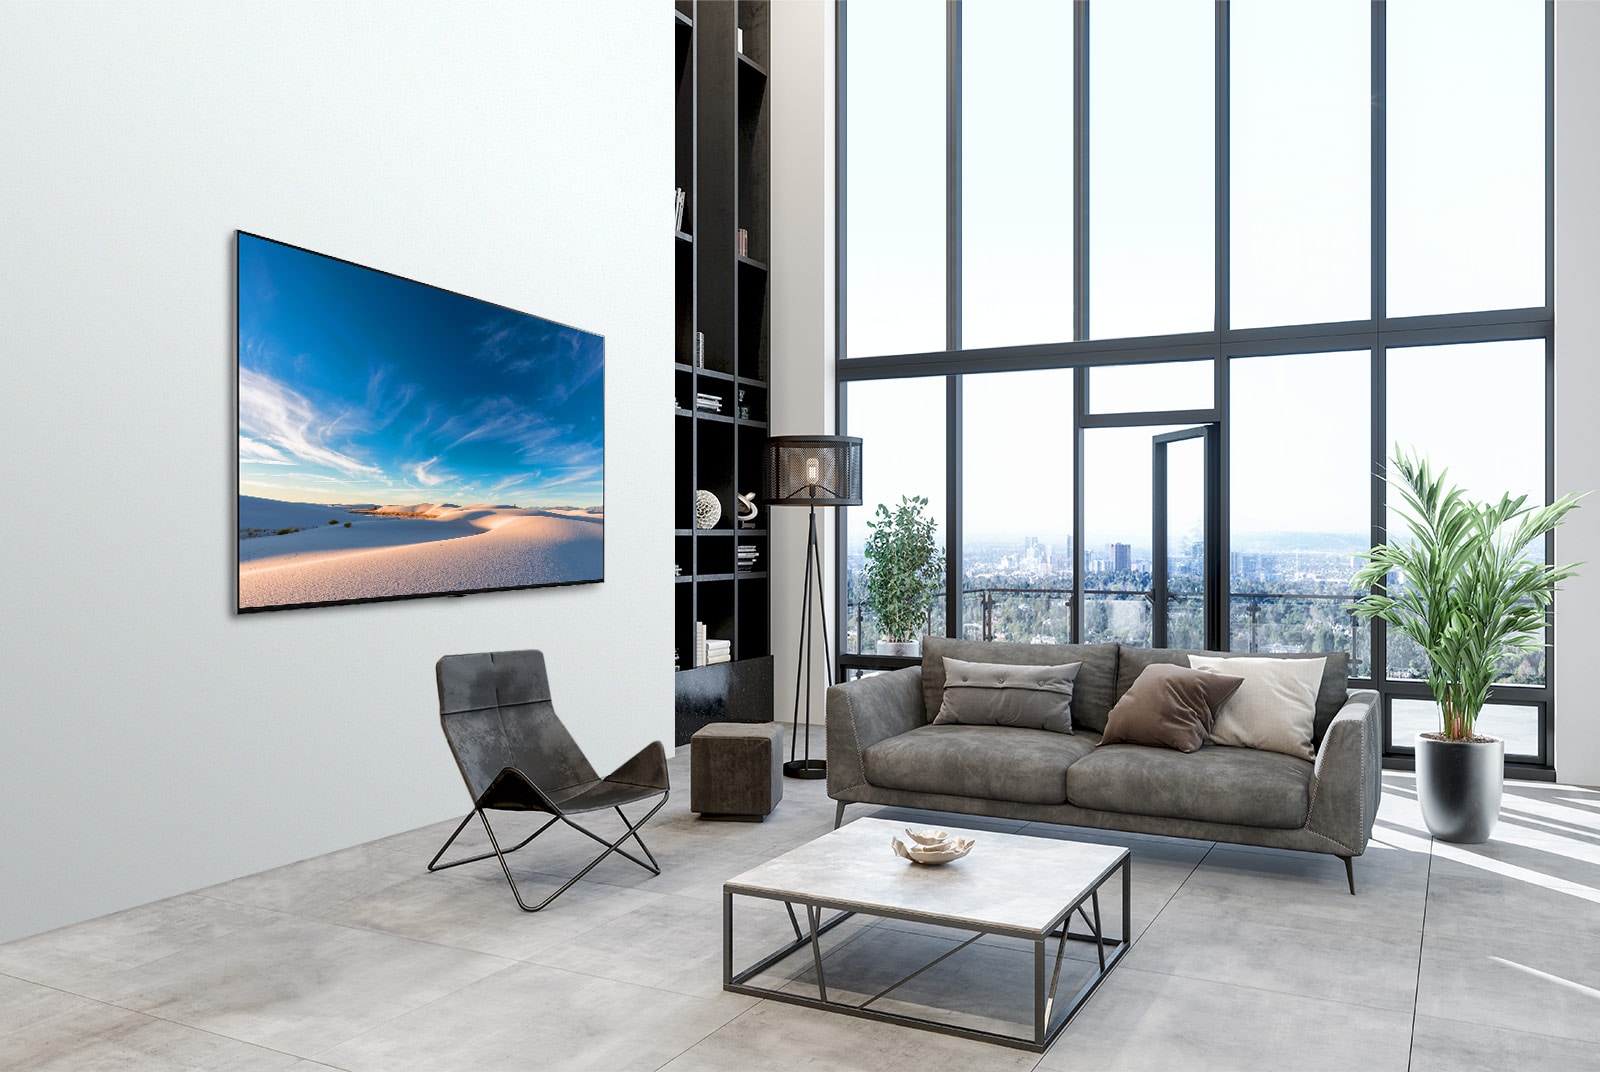 LG 65QNED90VPA QNED TV mounted flat against the wall in a modern interior space.